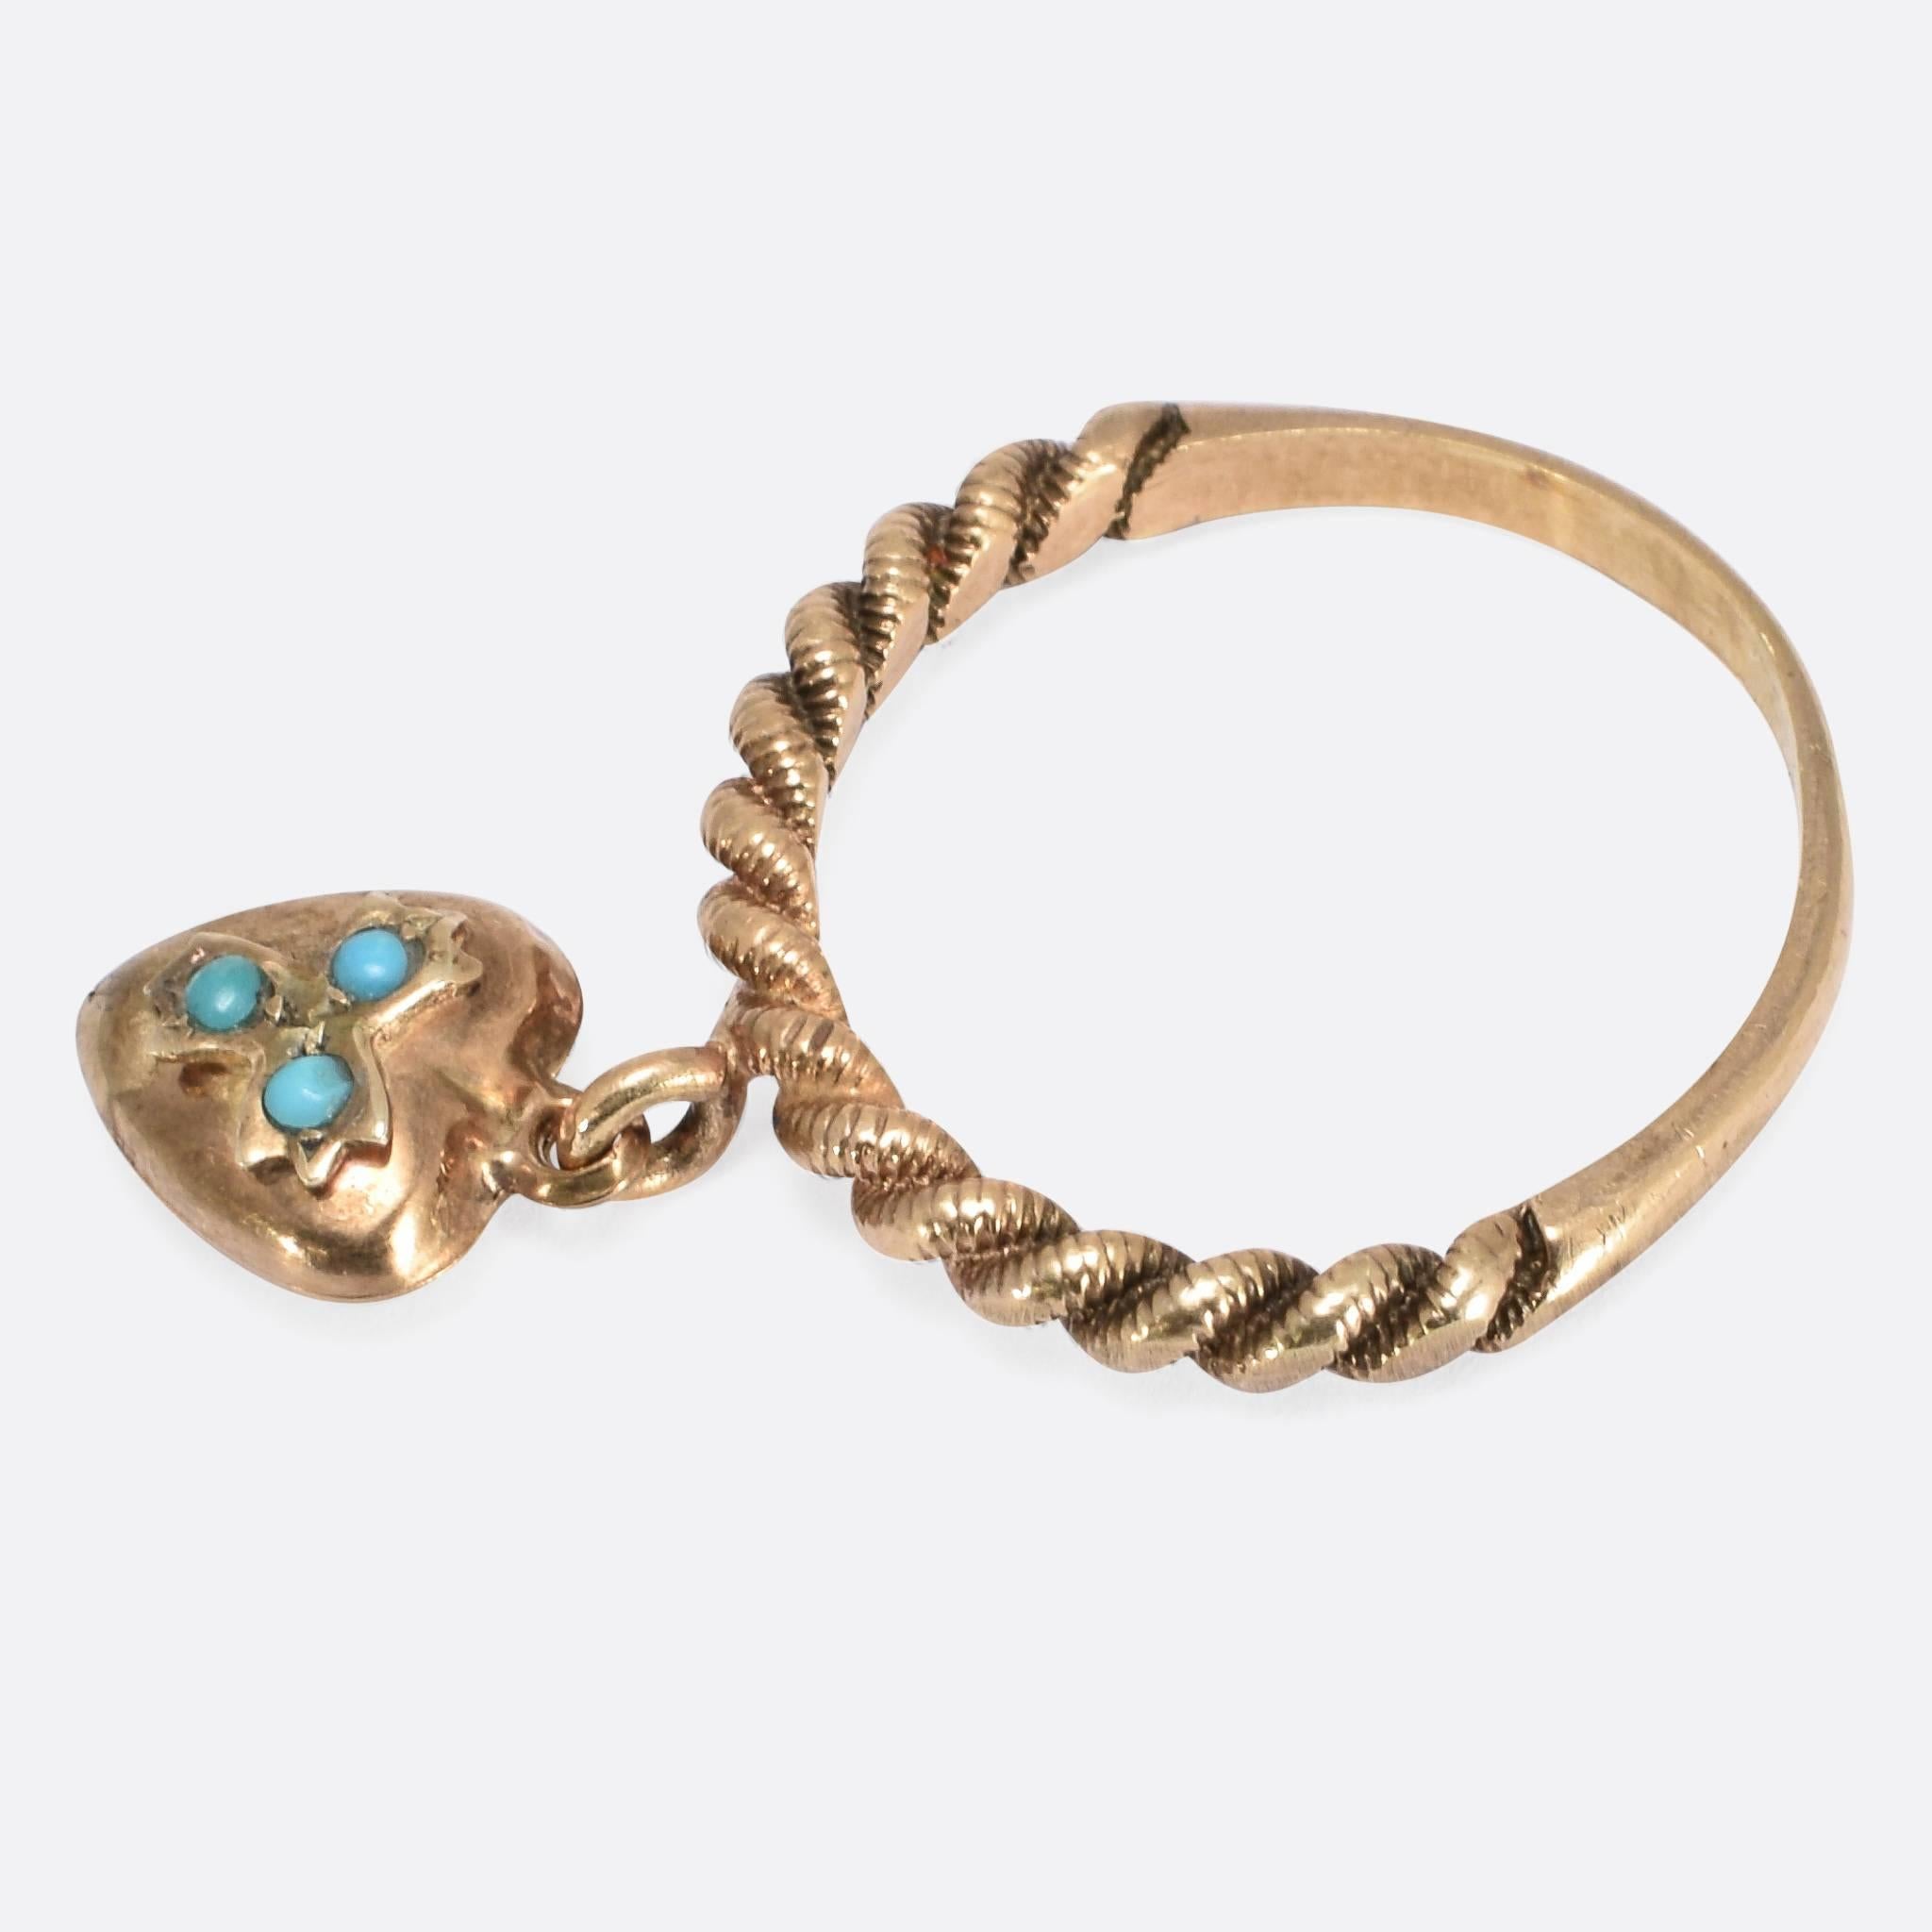 This sweet Victorian ring features a twisted design and an articulated heart drop, set with three turquoise stones. It's modelled in 9ct rose gold, and dates to c.1880. Ring Size:US: 7.5, or UK: O 1/2.